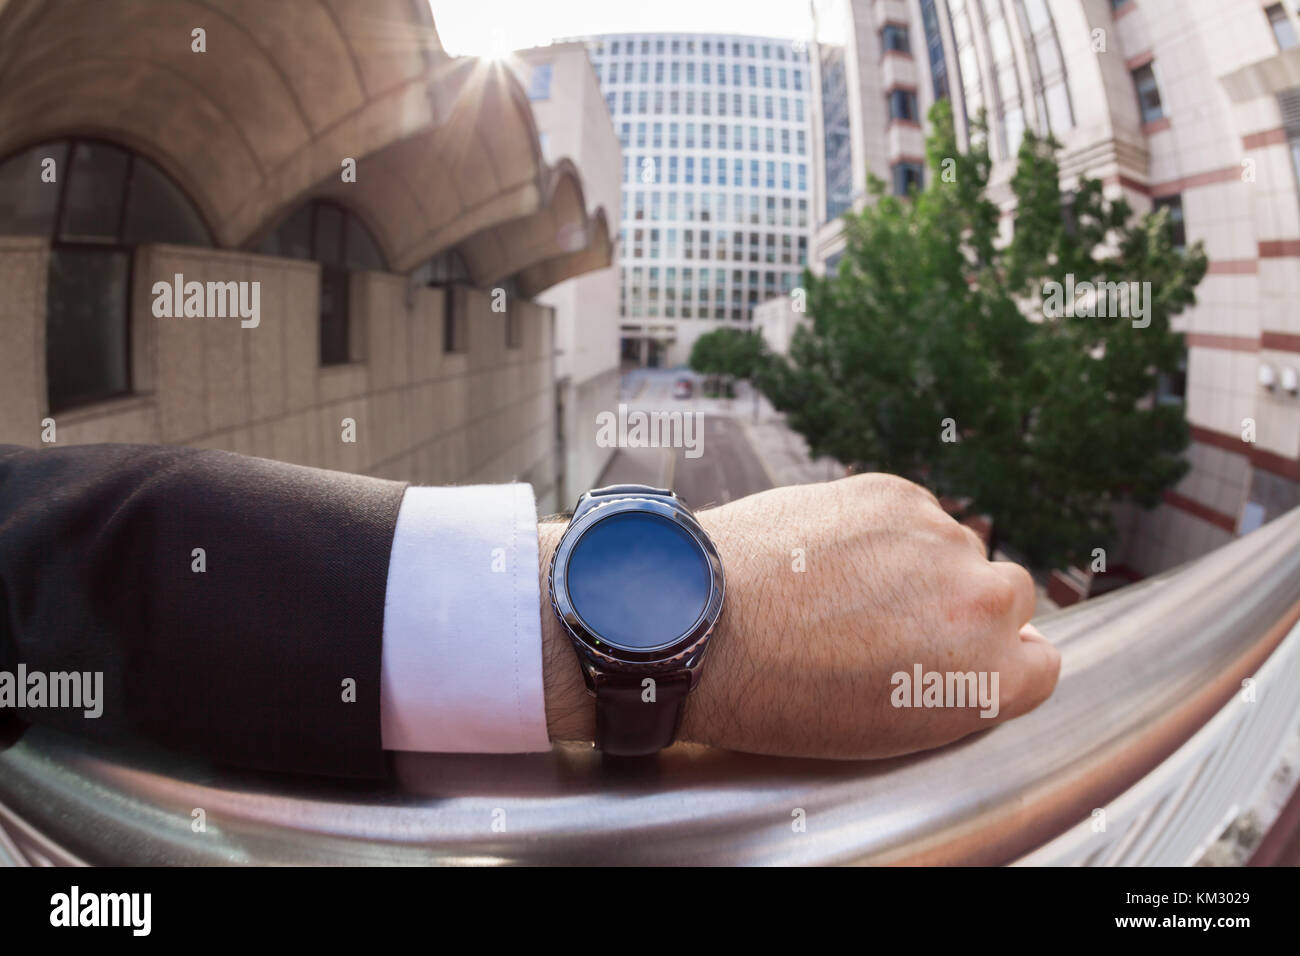 Personal perspective of a man answering a phone call on a smartwatch Stock Photo